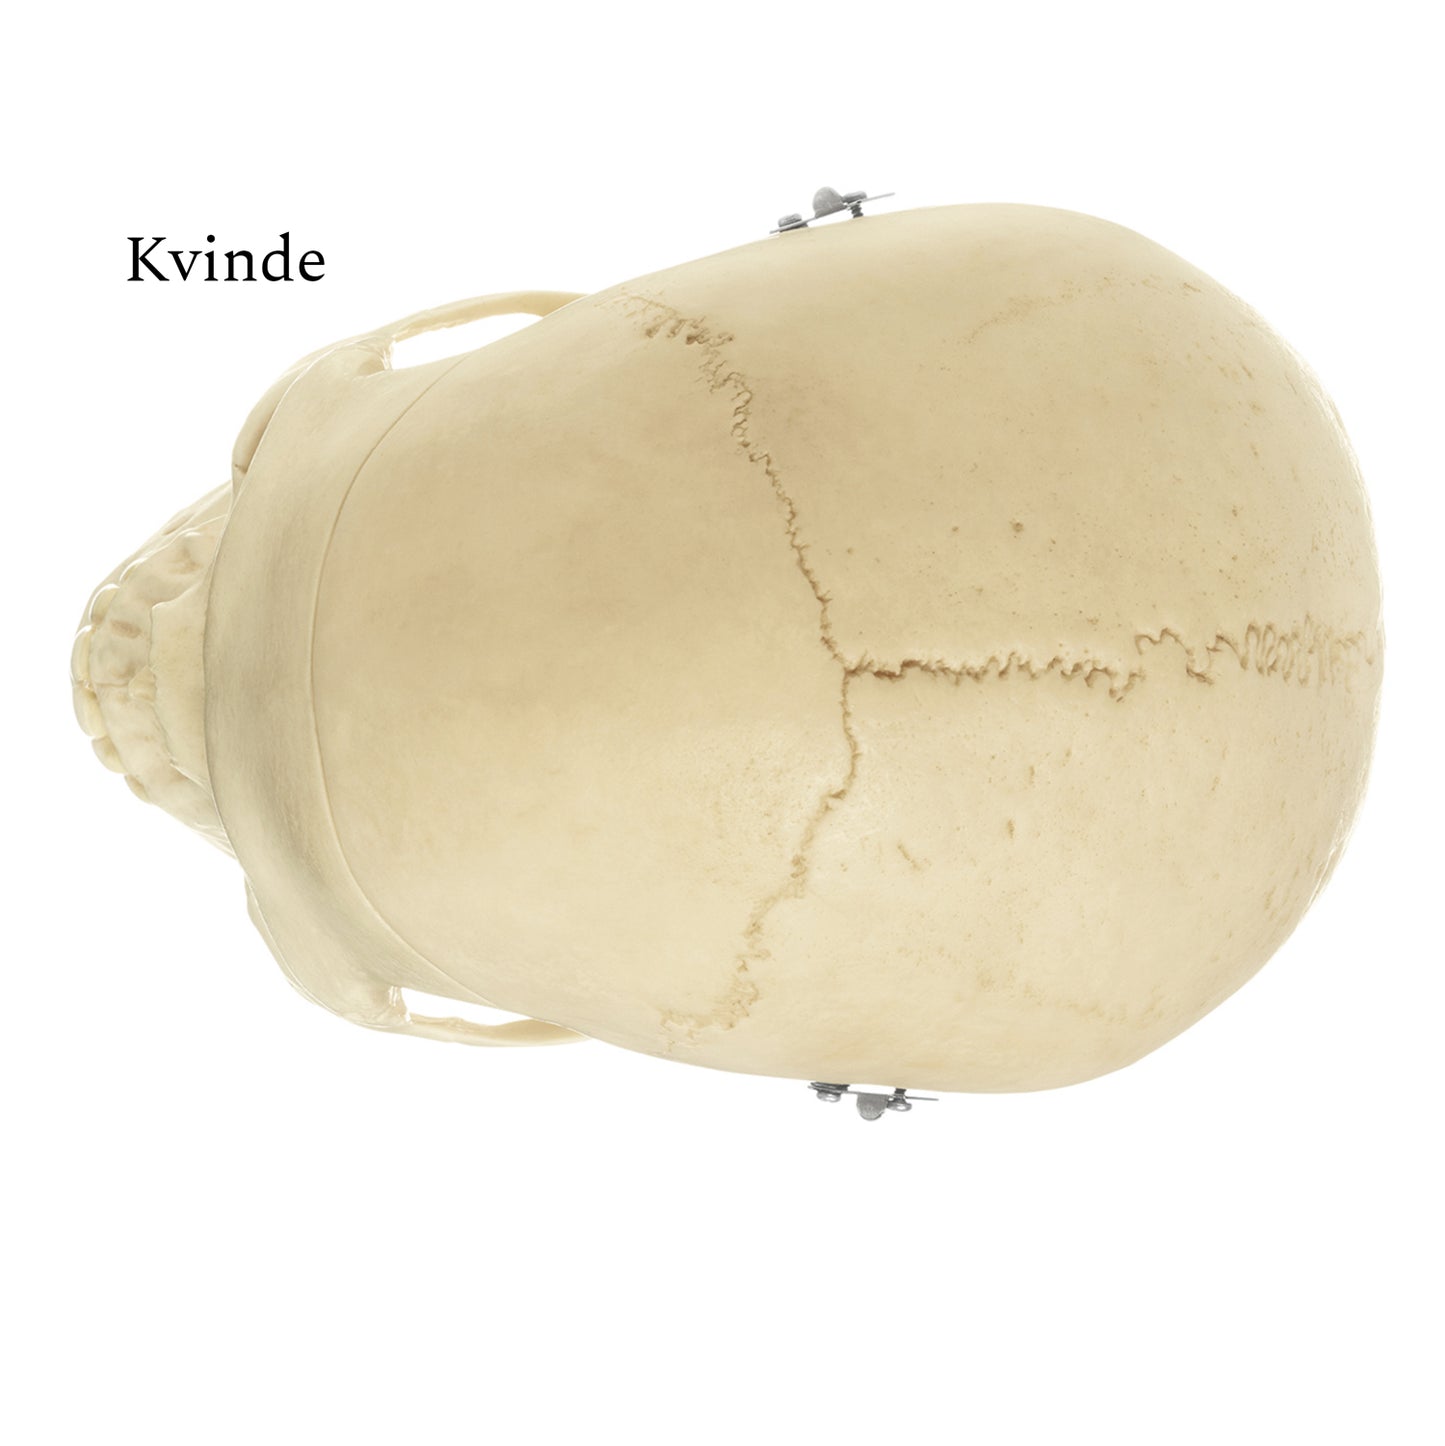 Particularly lifelike skull model in adult size. Can be separated into 3 parts